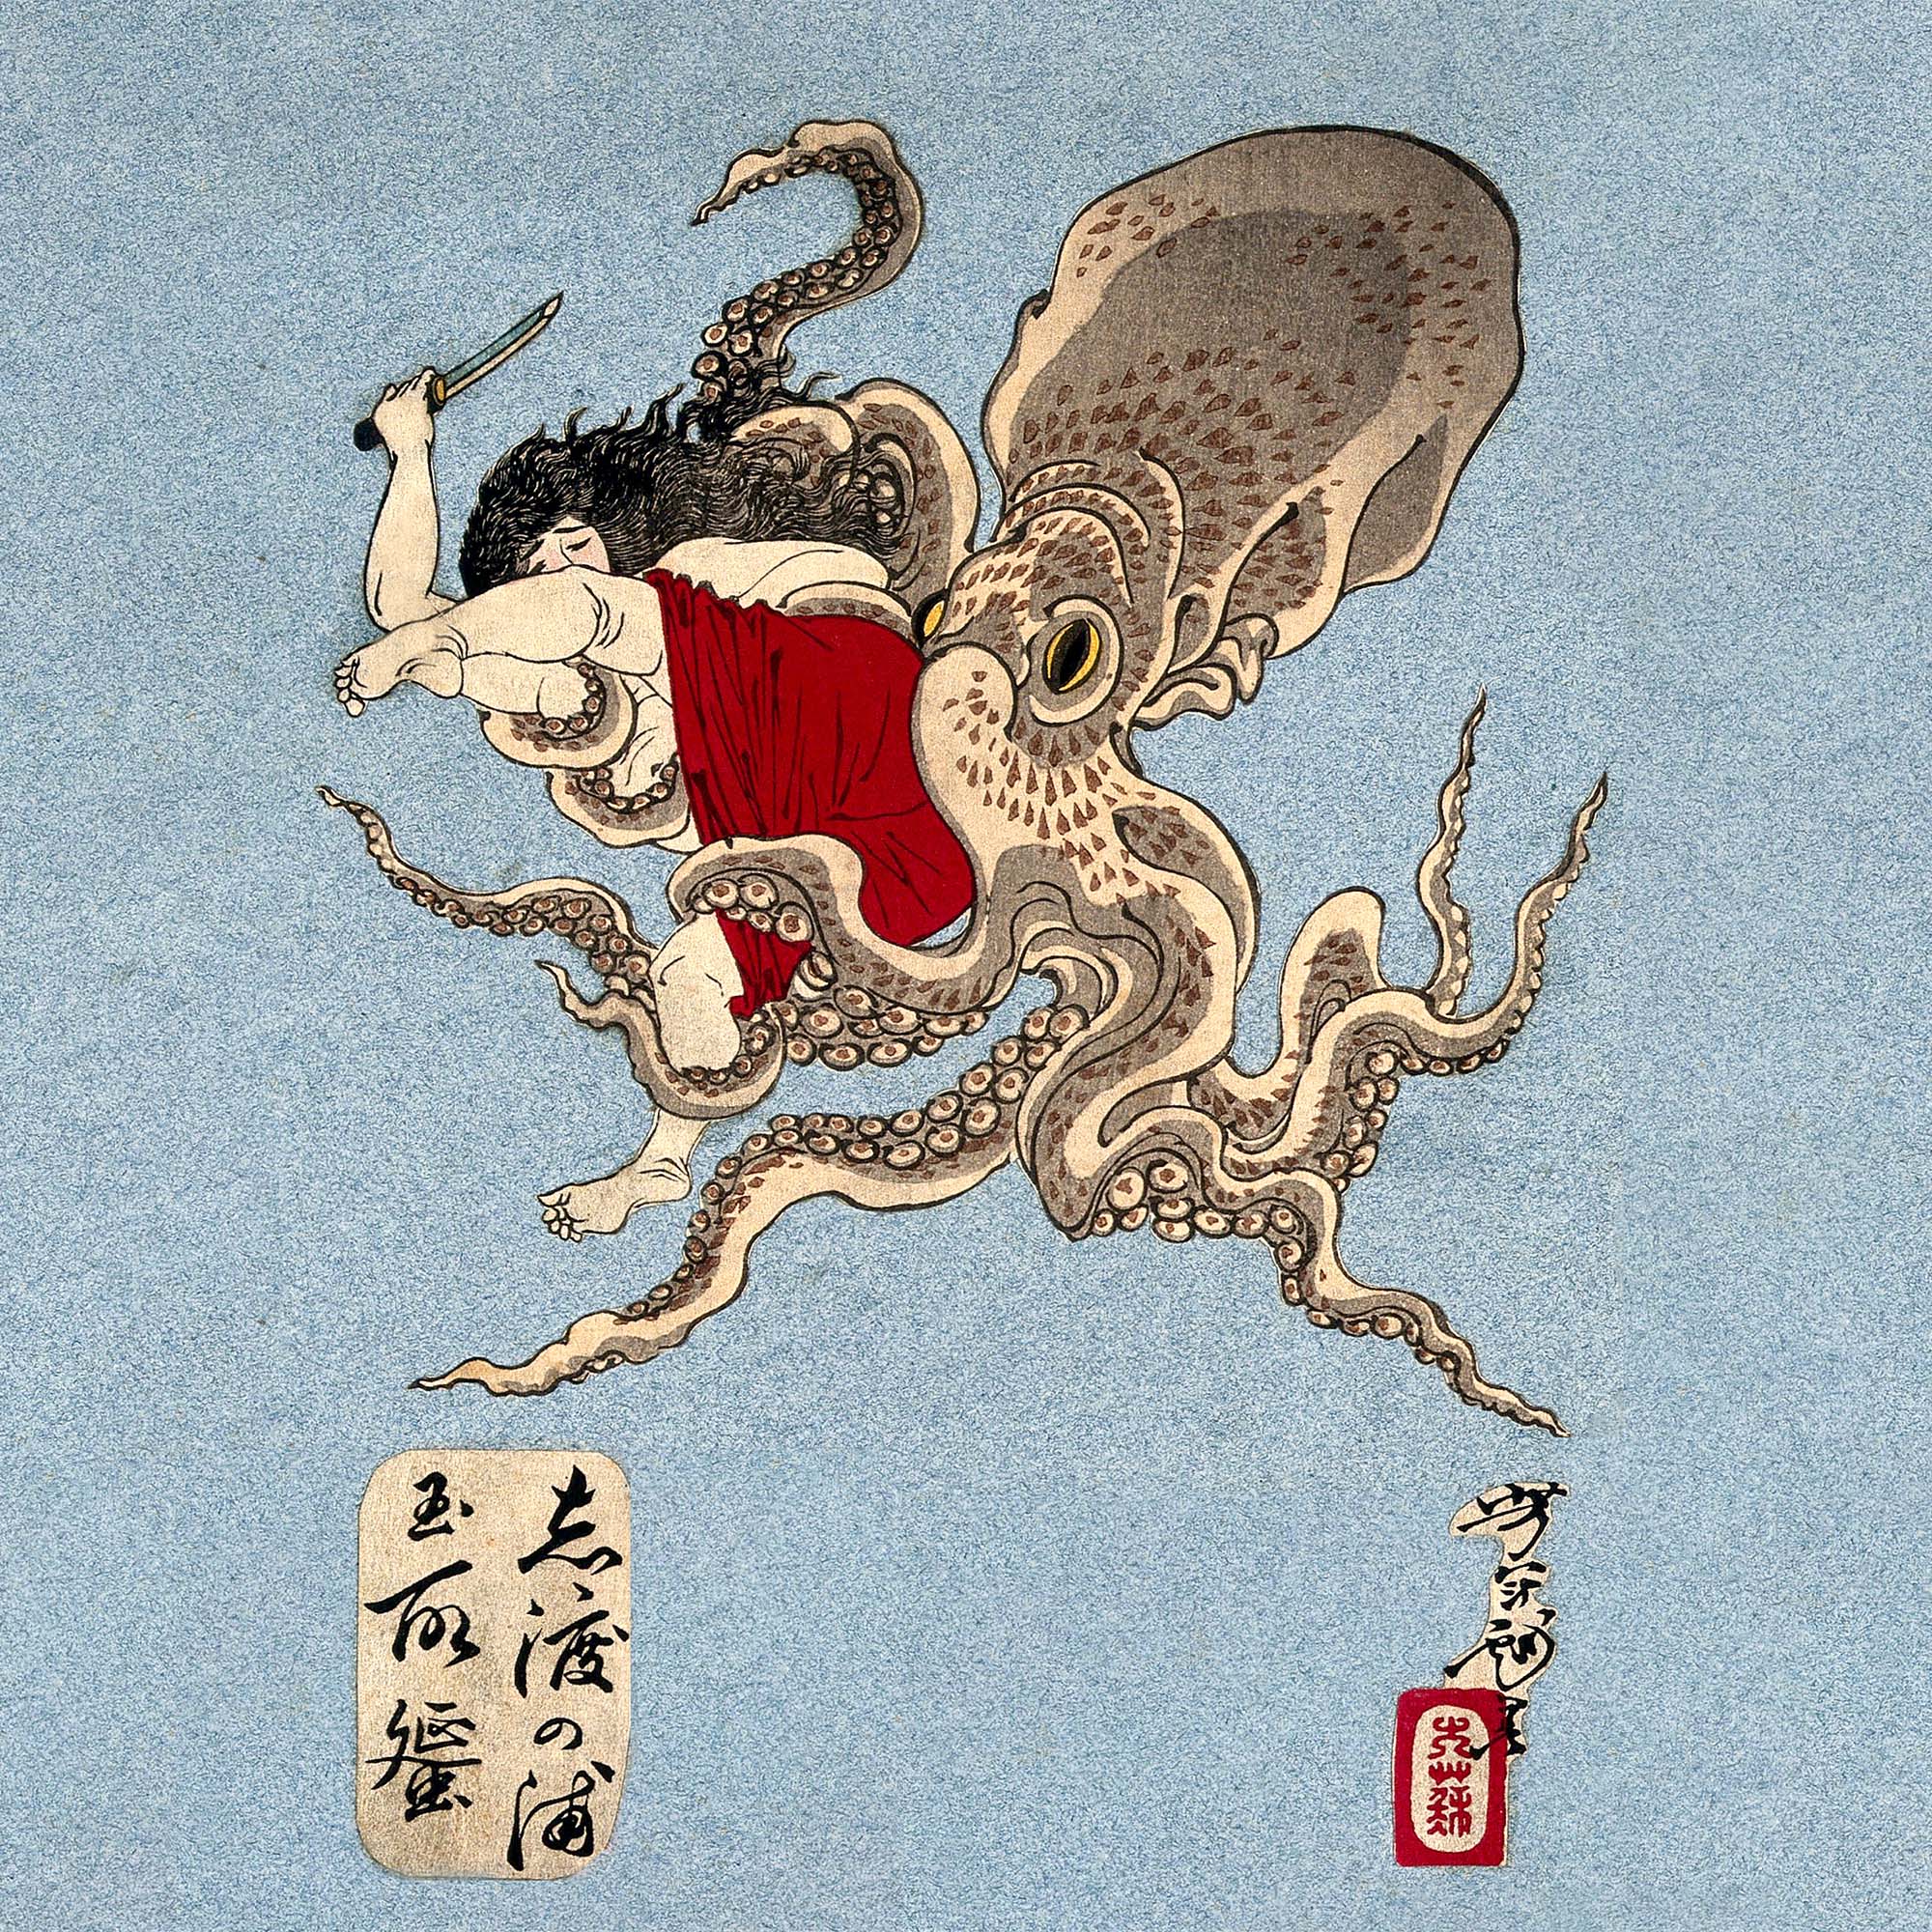 T-shirt Woman Battling an Octopus (Yoshitoshi) | "A Collection of Desires" Squid Graphic Art T-Shirt